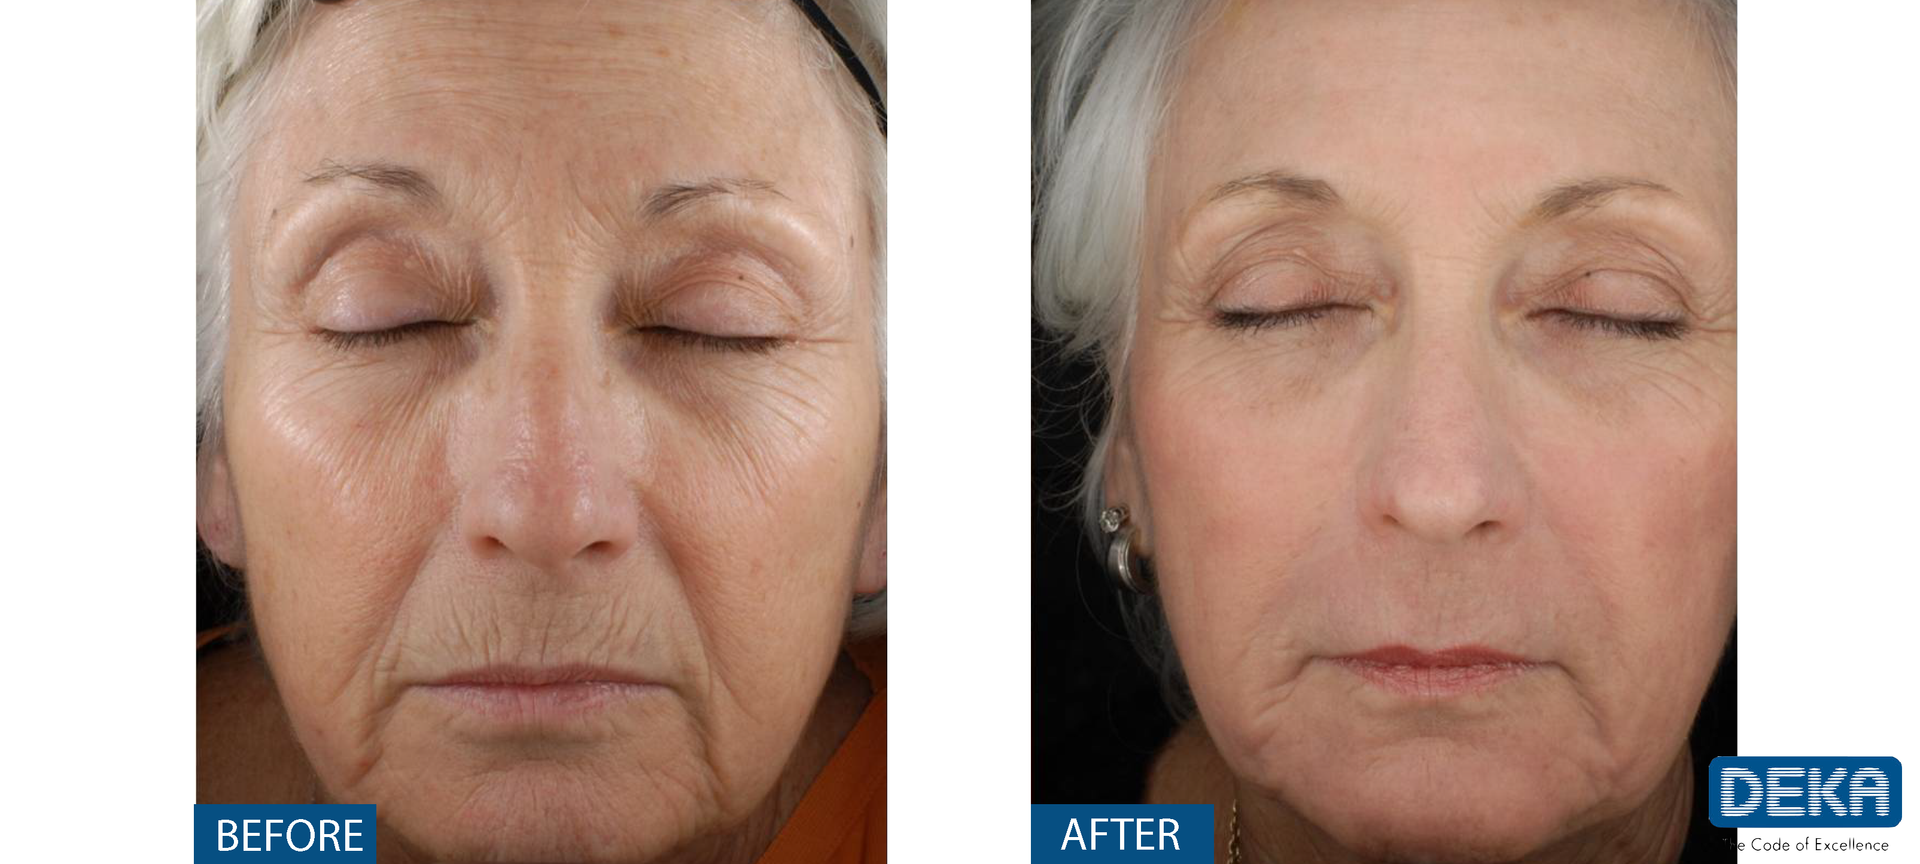 A before and after photo of a woman 's face with her eyes closed.